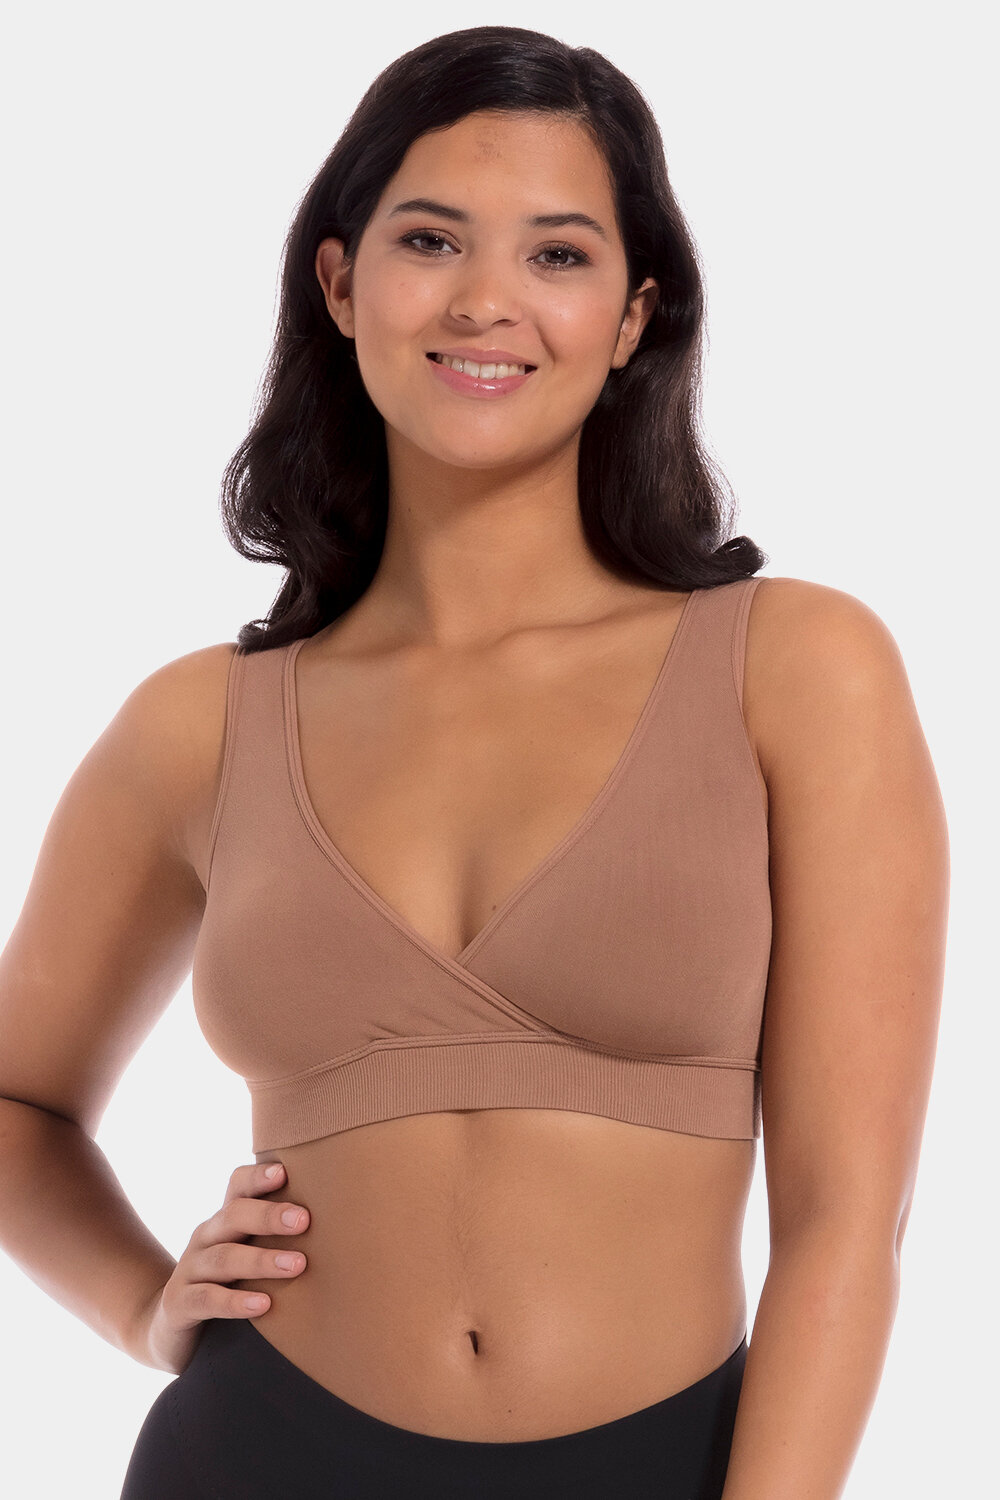 JML - Everyday Easier - Miracle Bamboo Comfort Bra really is a miracle of  bra design. Made with silky-smooth bamboo-viscose fabric, it is designed to  be the ultimate, super-comfortable bra. bit.ly/mbcomfortbra